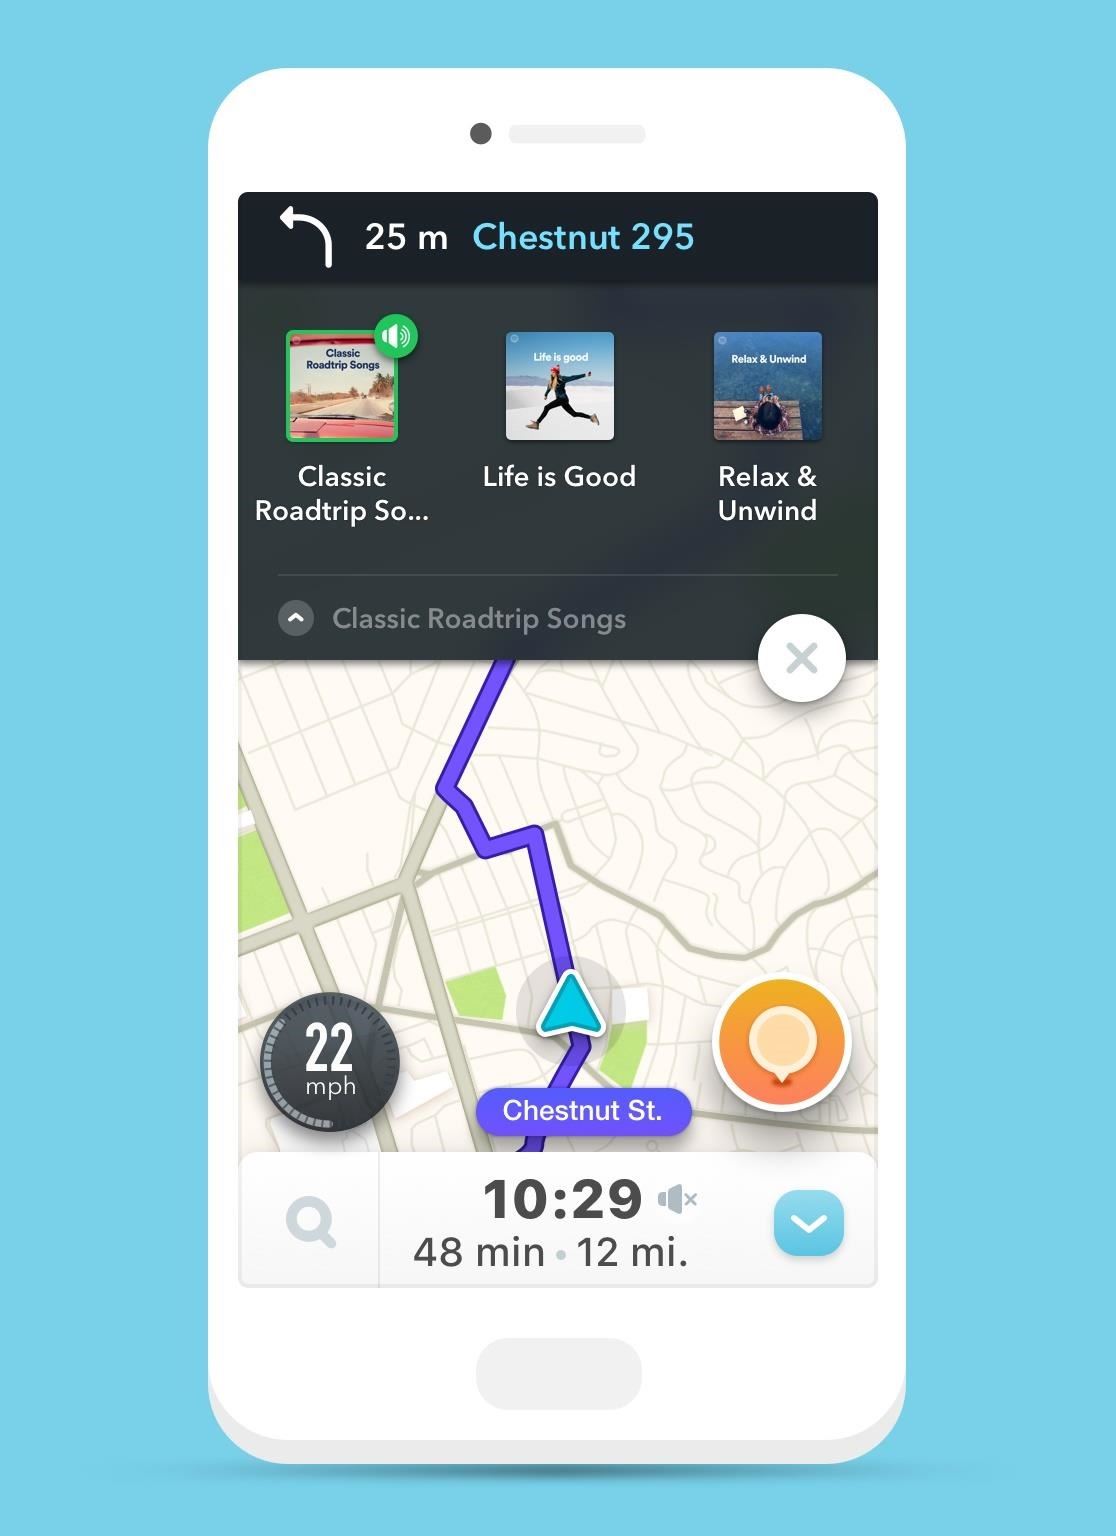 Waze & Spotify Team Up for Easy Access to Music While You Drive